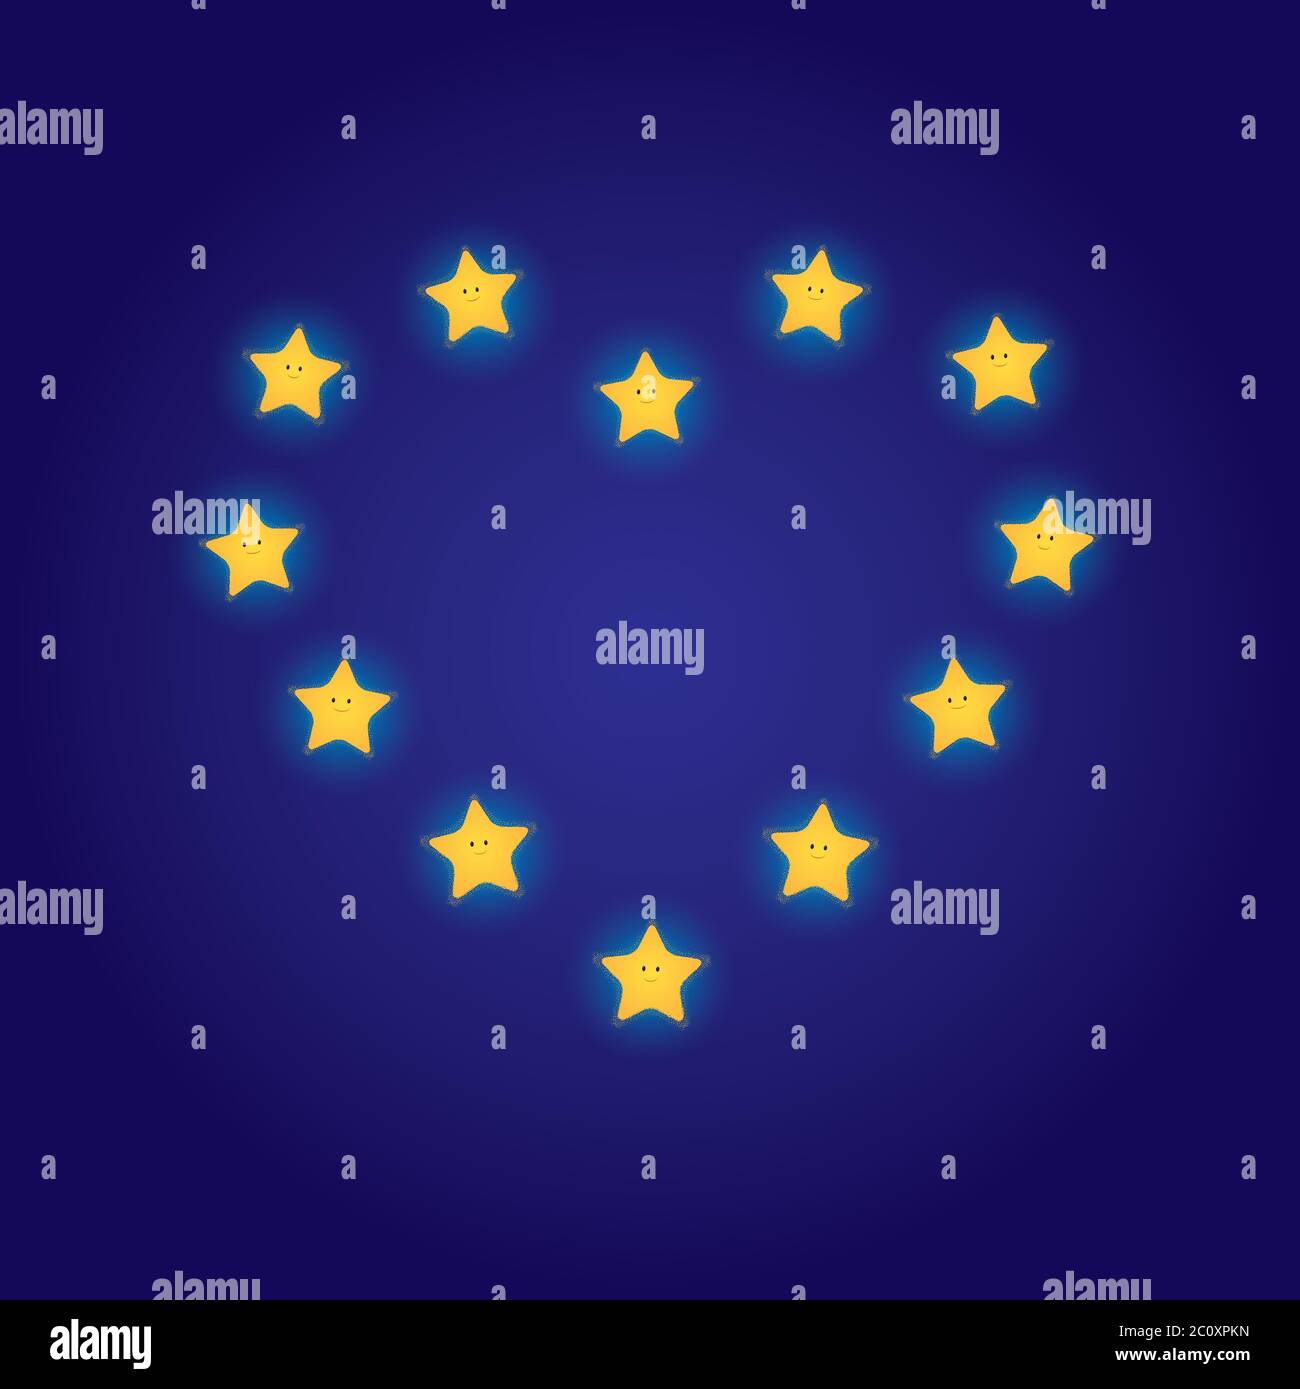 Vector illustration of a cartoon smiling stars arranged in the shape of a heart. Square format, dark blue background. Stock Vector